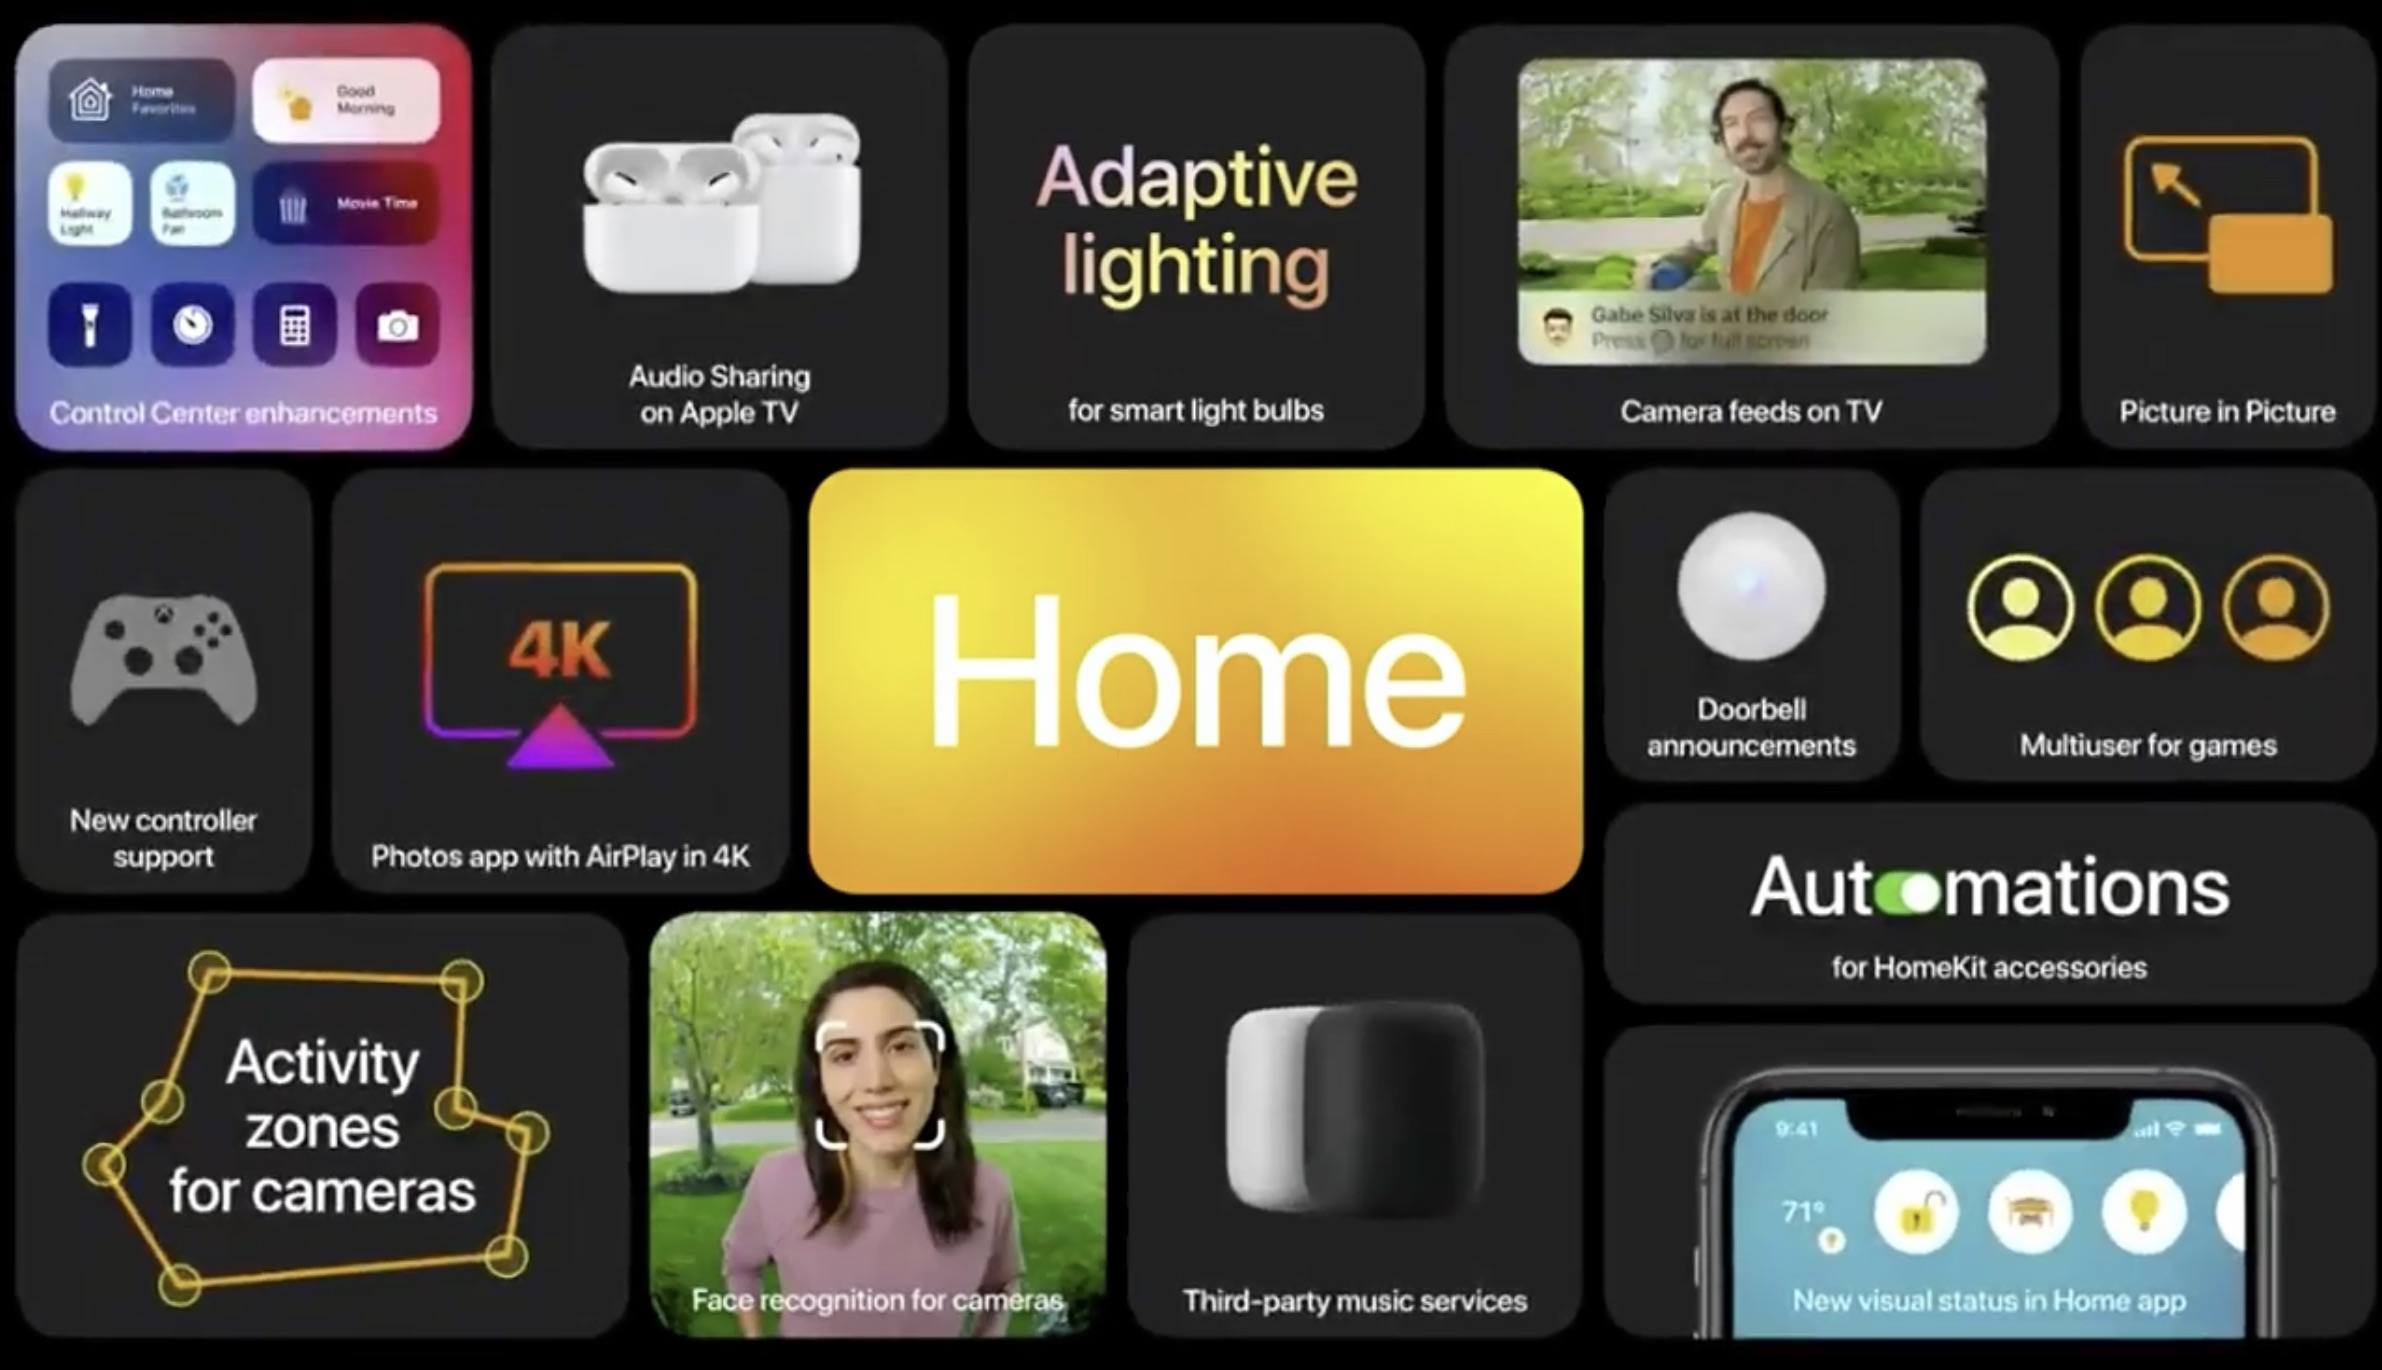 Apple tvOS 14 Update Adds Picture-in-Picture, HomeKit Features